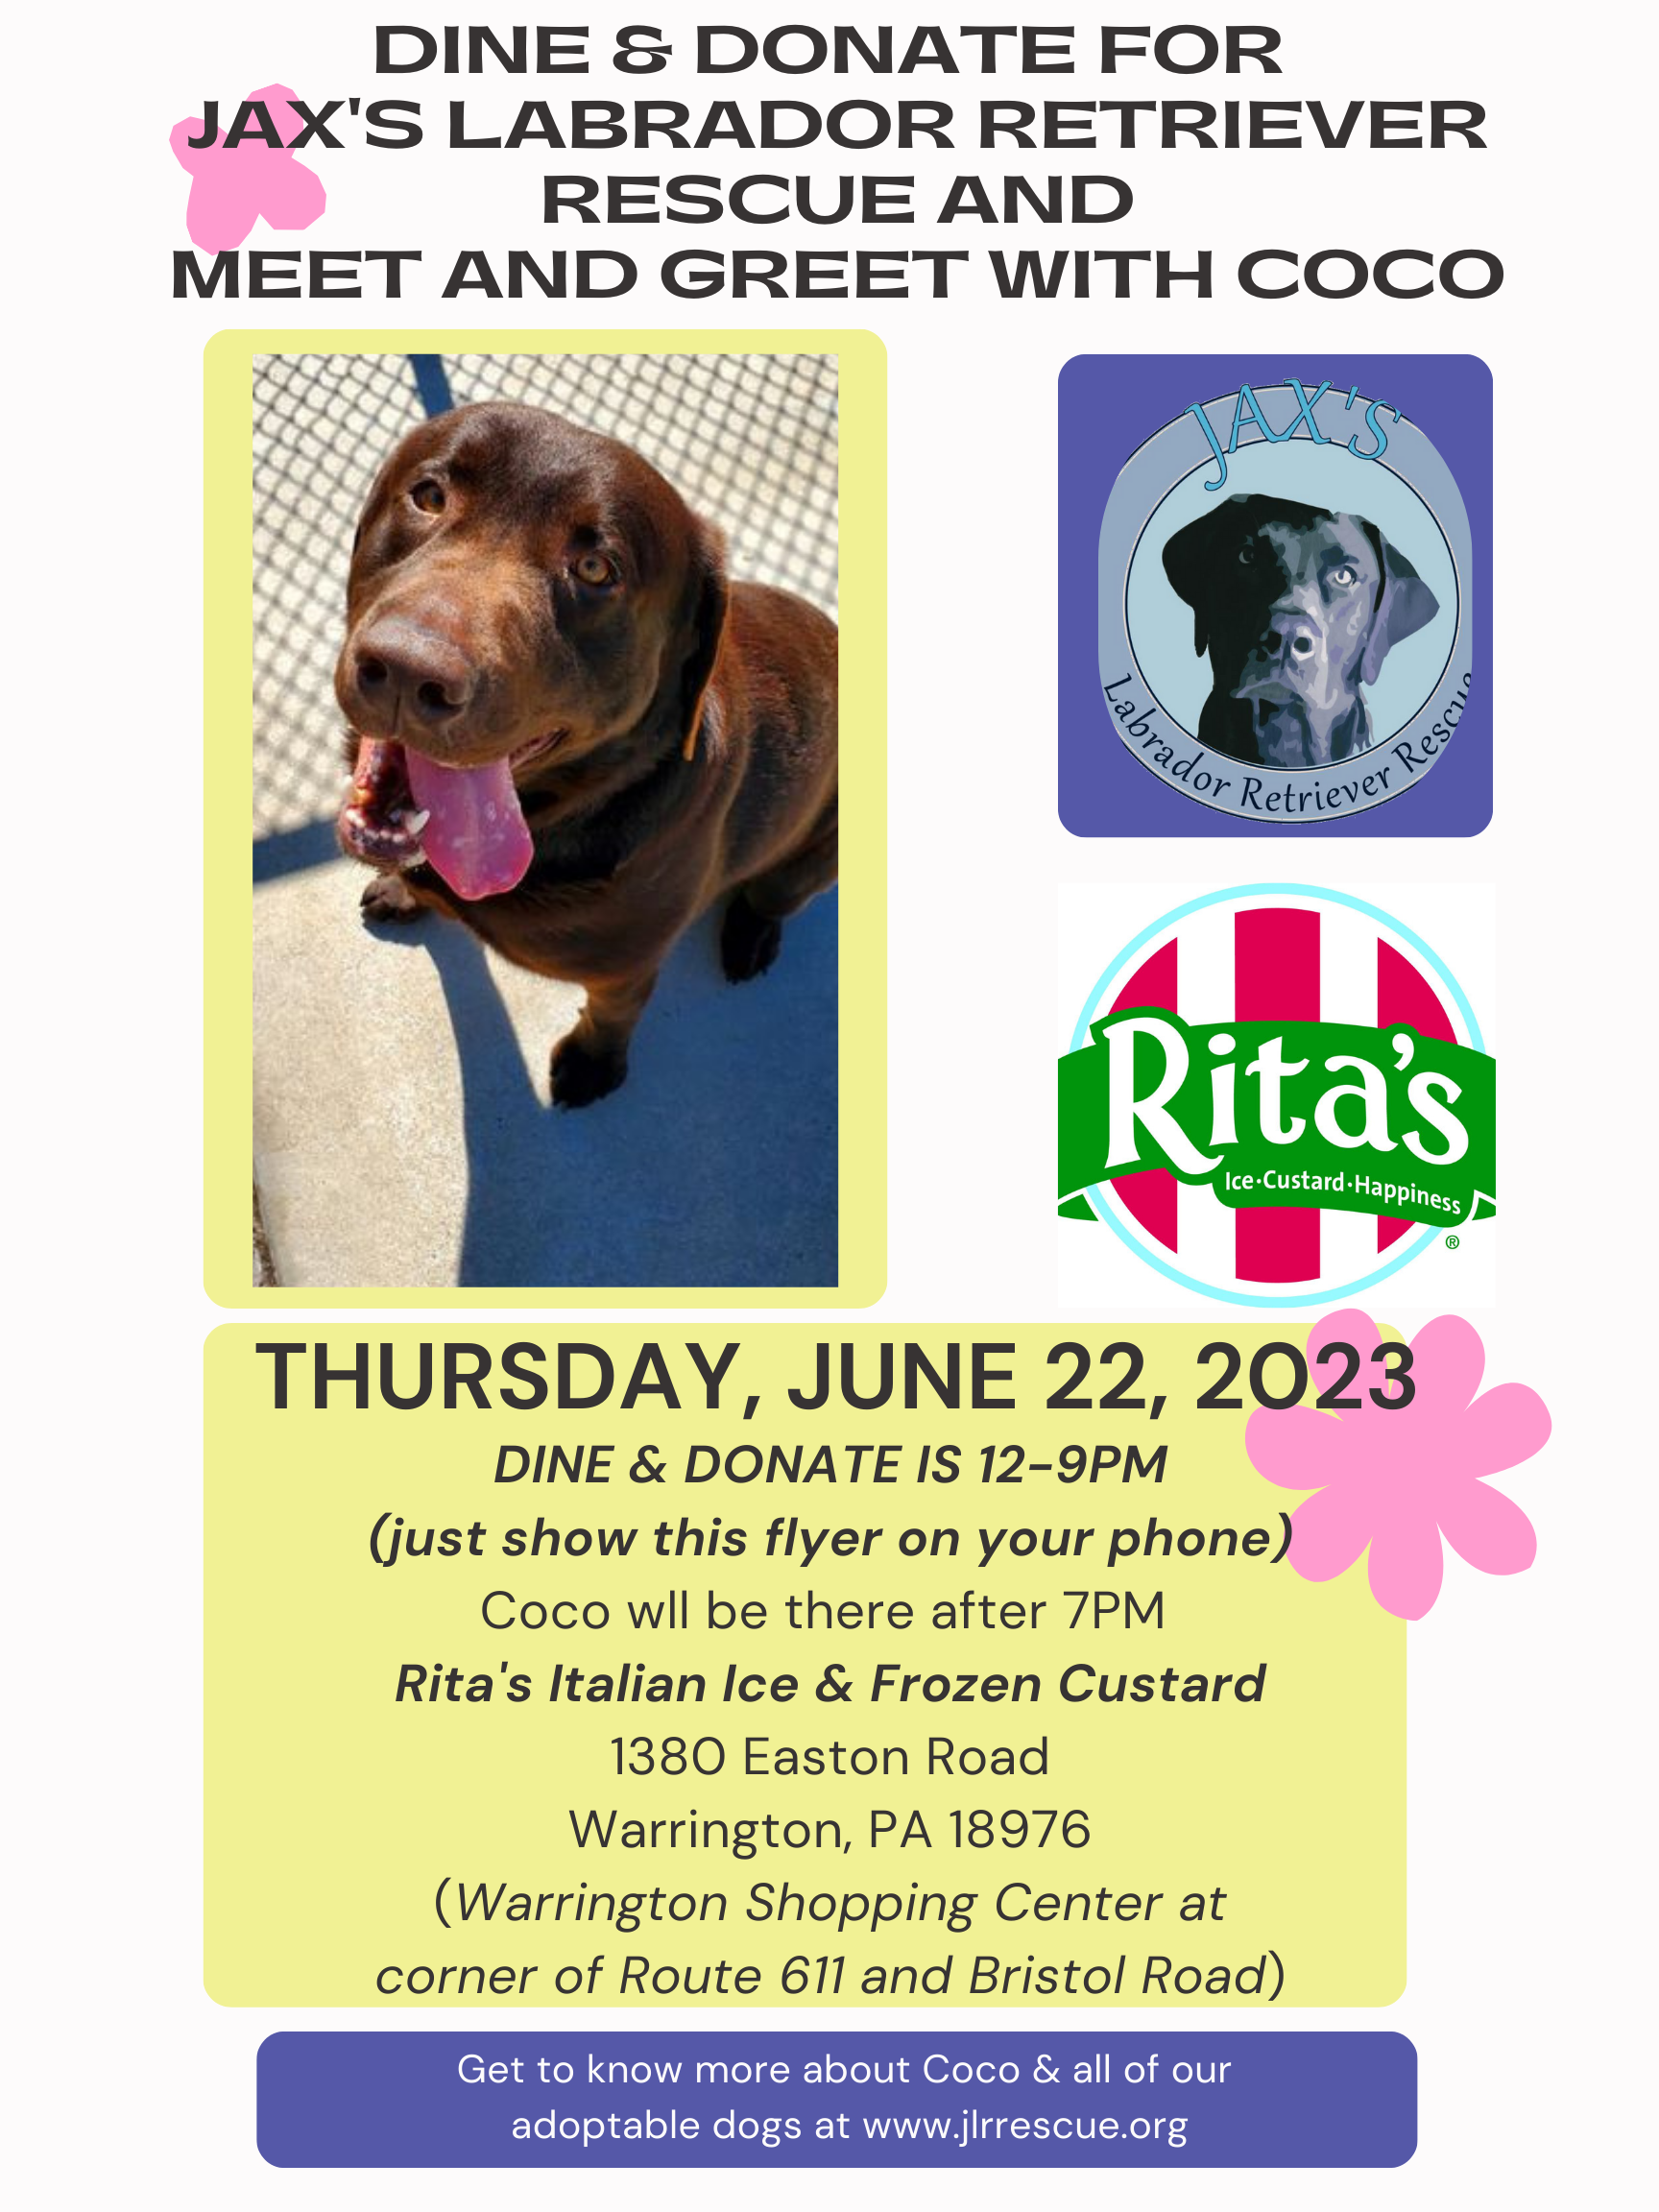 Dine & Donate at Rita’s and Meet & Greet with Coco